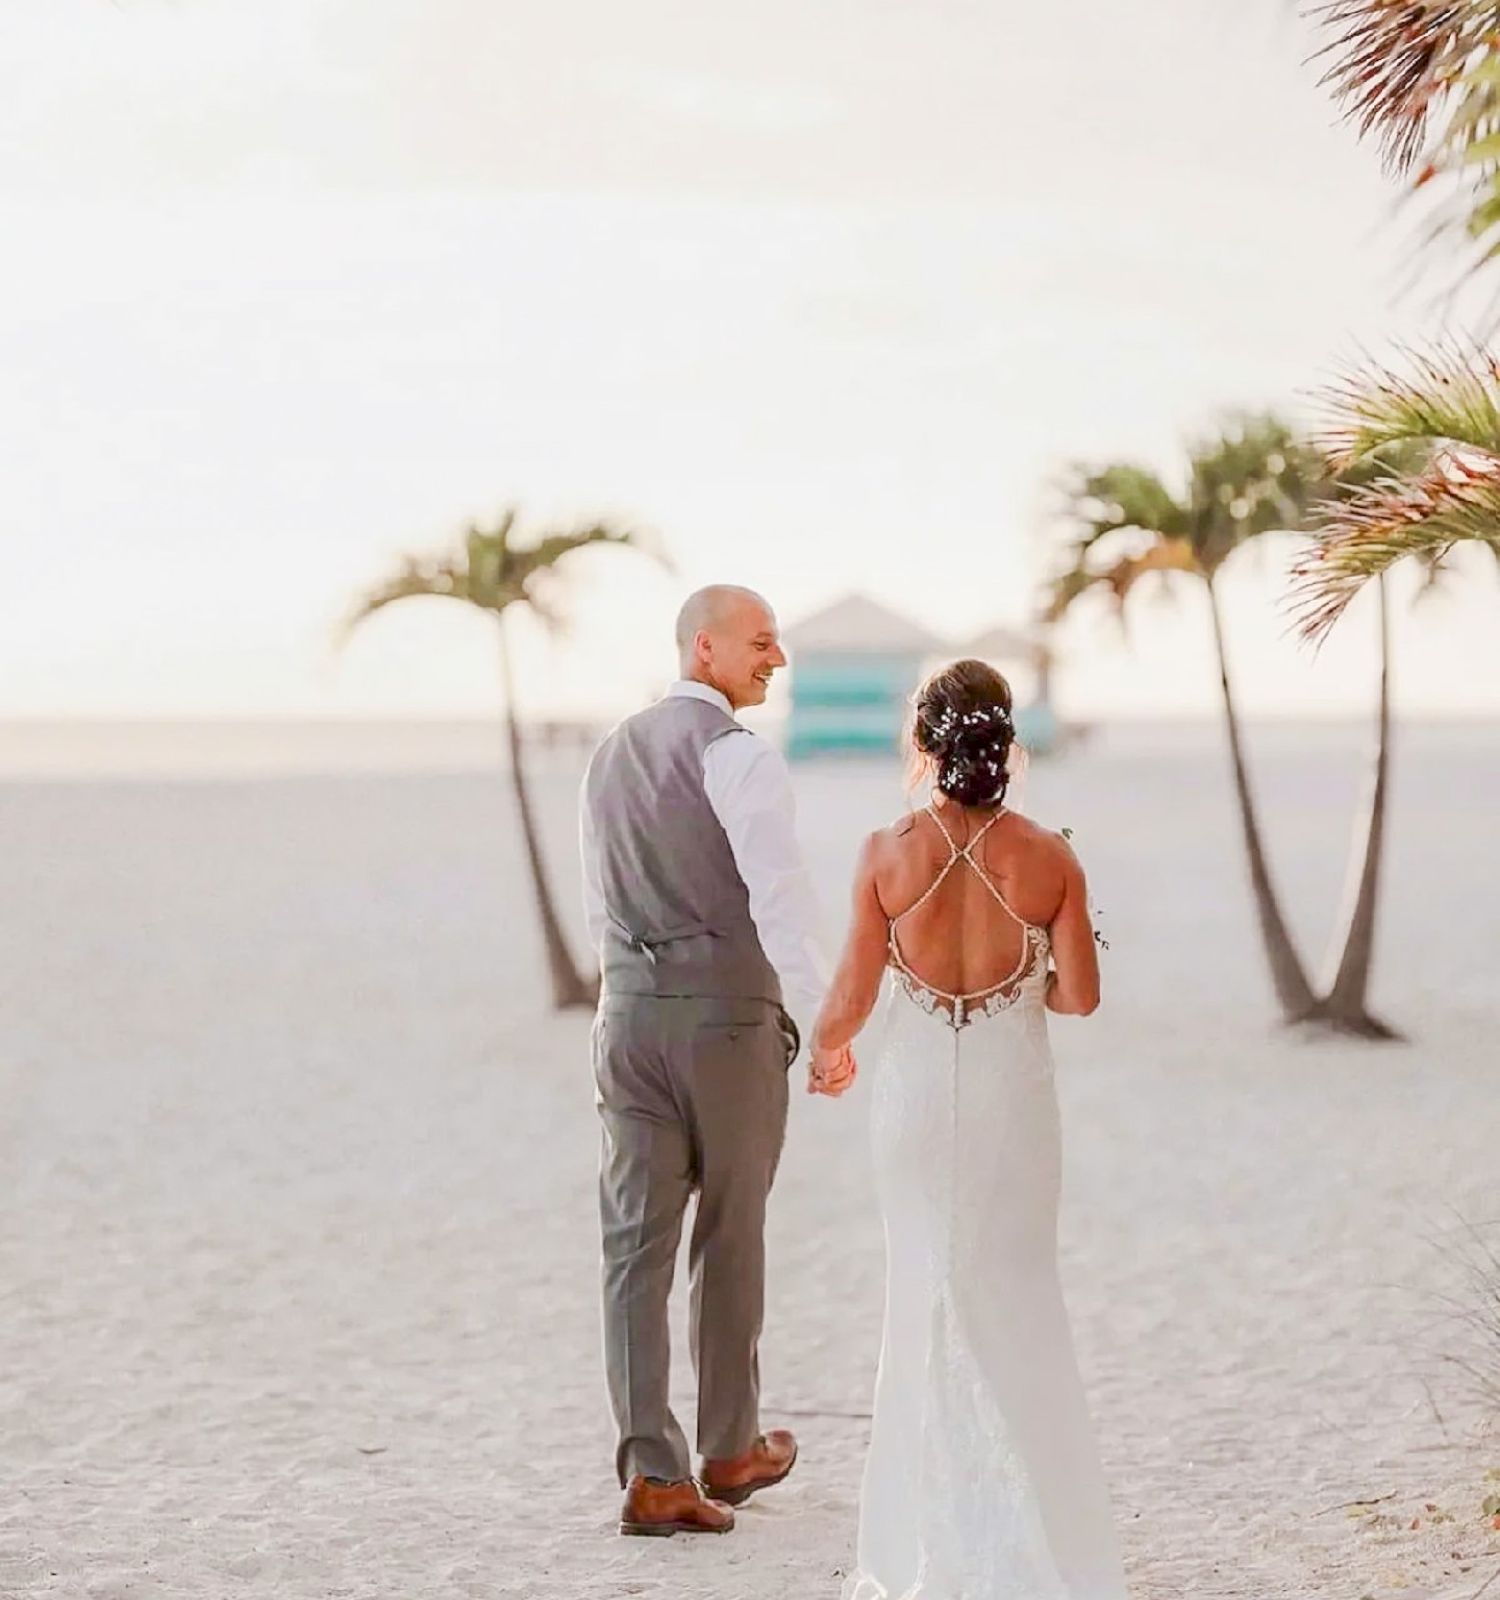 A couple wearing wedding attire walks on a beach adorned with palm trees, heading towards a distant structure, bathed in a serene sunset glow.